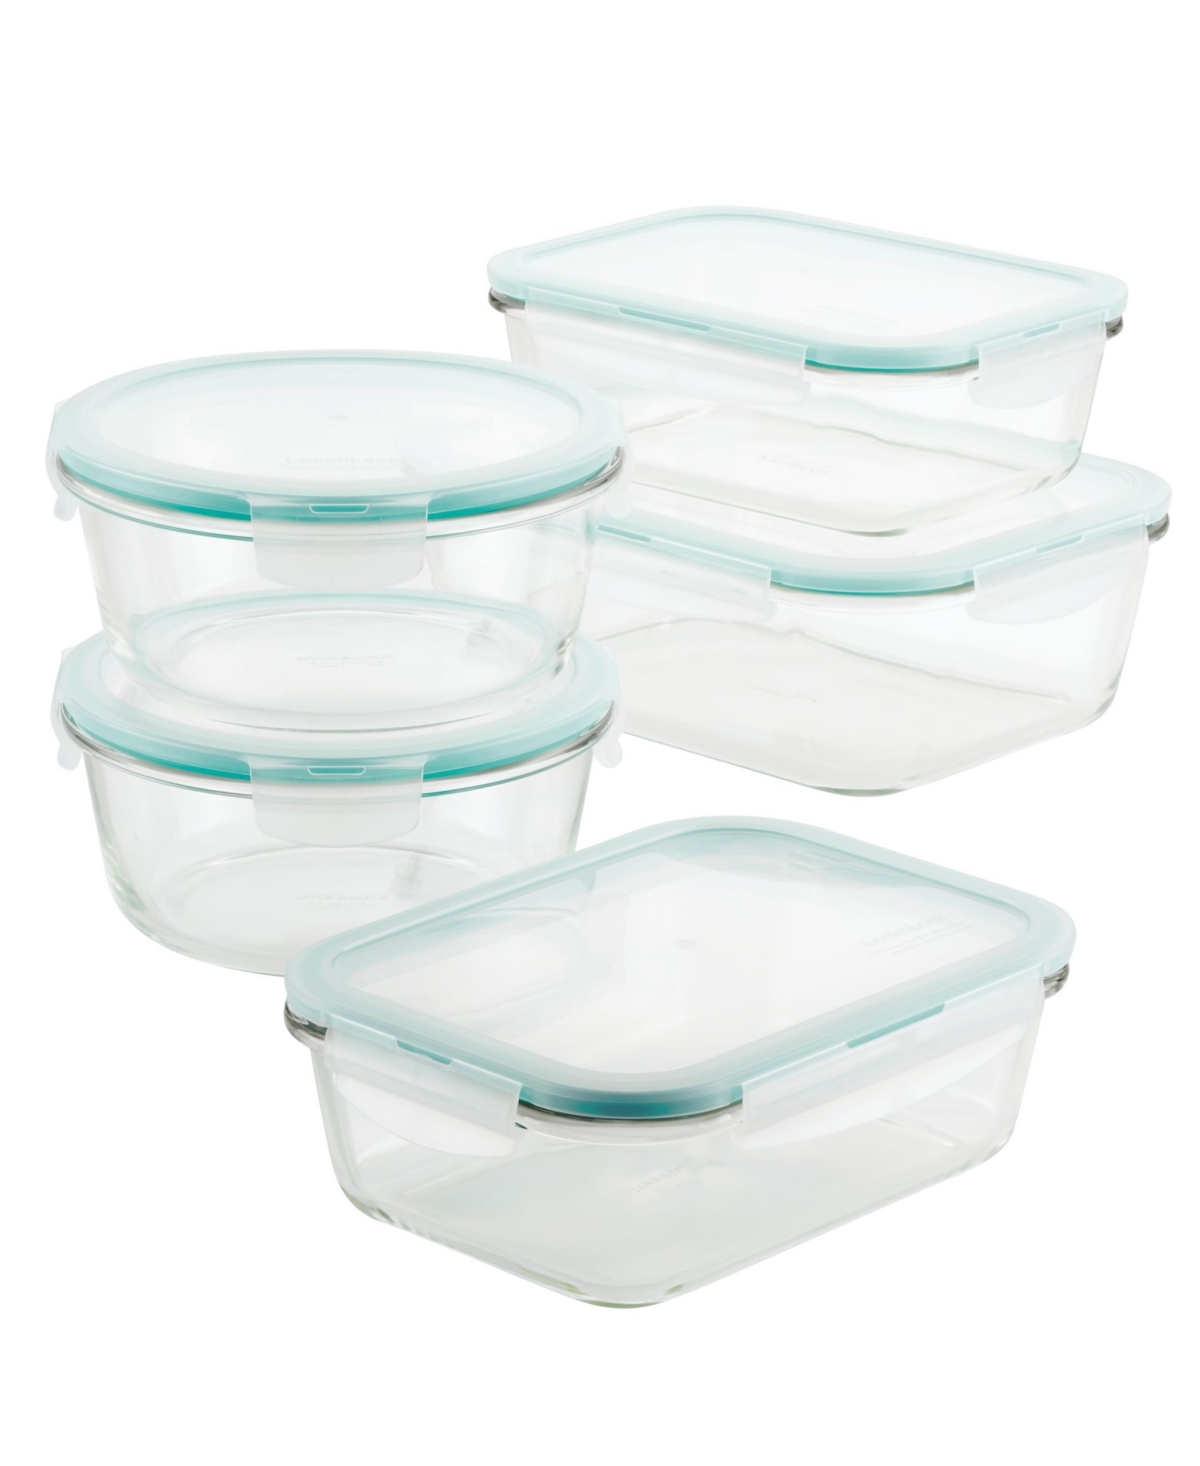 Purely Better Glass 10-Pc. Food Storage Container Set - Clear